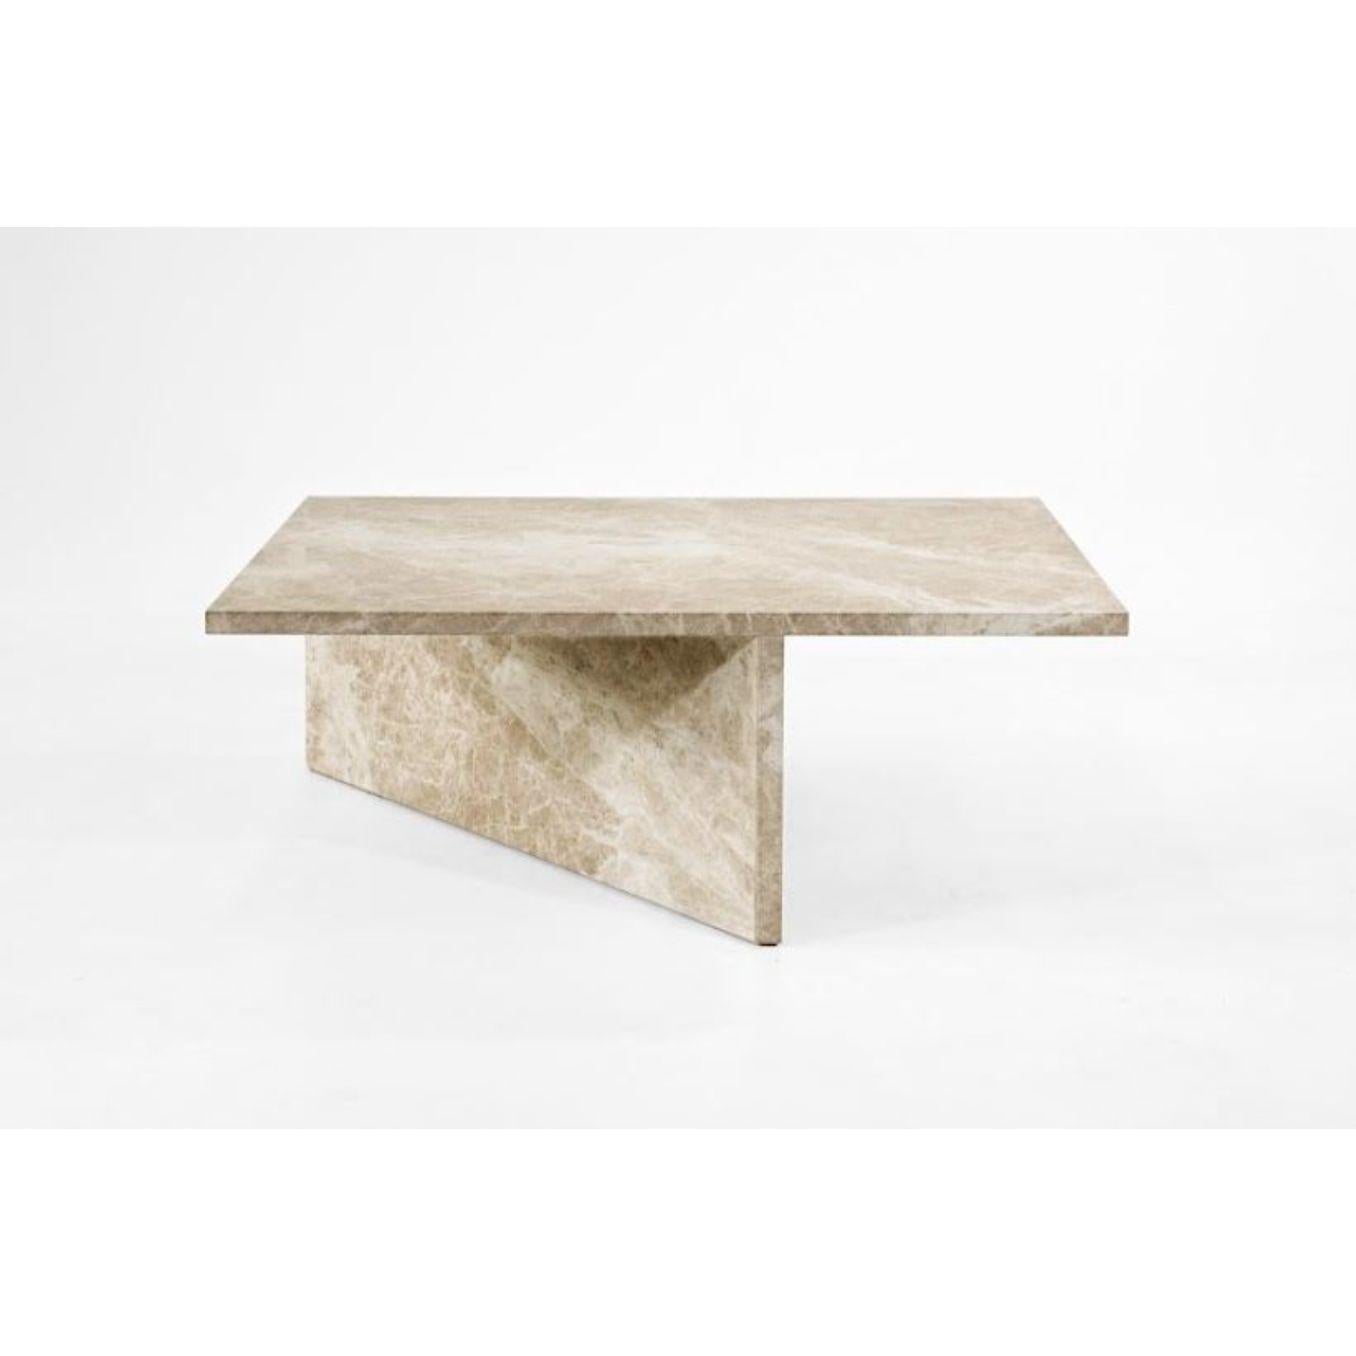 Surpriced by Joy coffee table by Claste 
Dimensions: D 137.2 x W 91.5 x H 38 cm
Material: Marble
Weight: 330 kg
Also vailable in two standard sizes.

This all marble table offsets a rectangular top over a triangular base creating a piece that